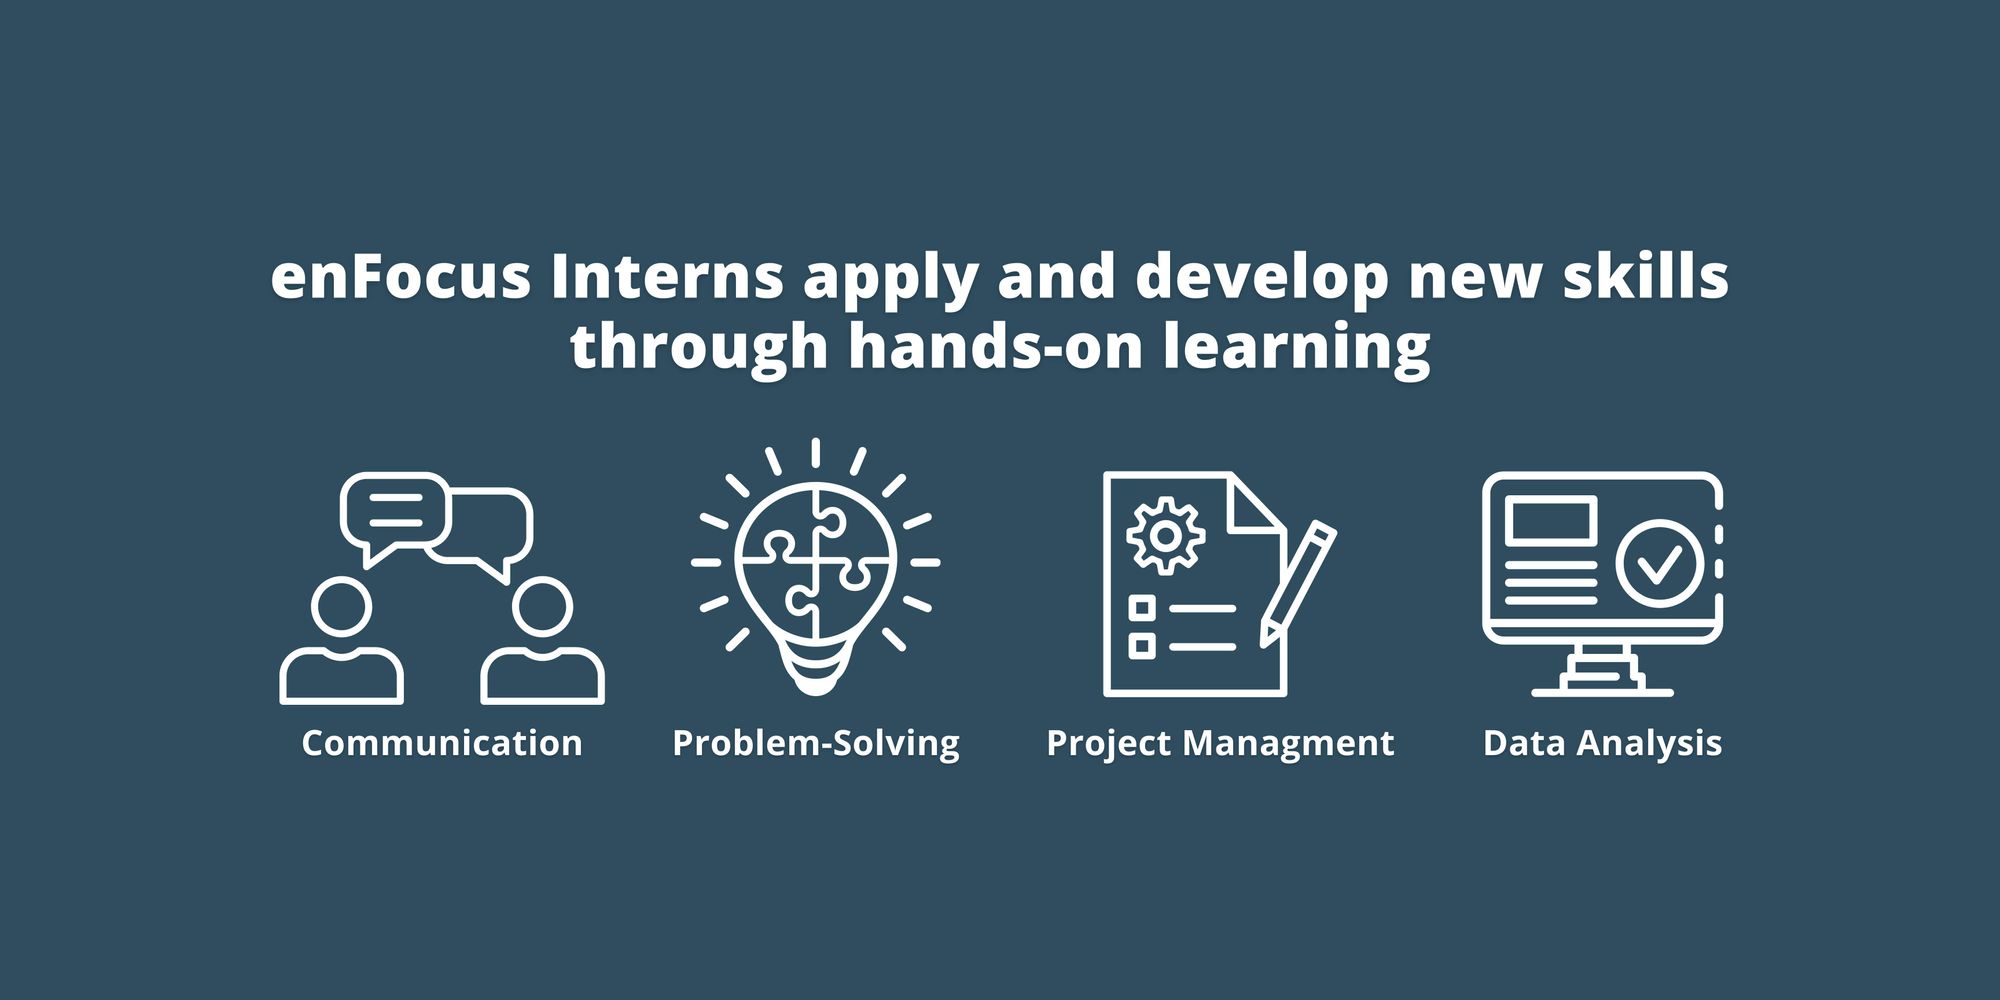 enFocus Interns apply and develop new skills through hands-on learning